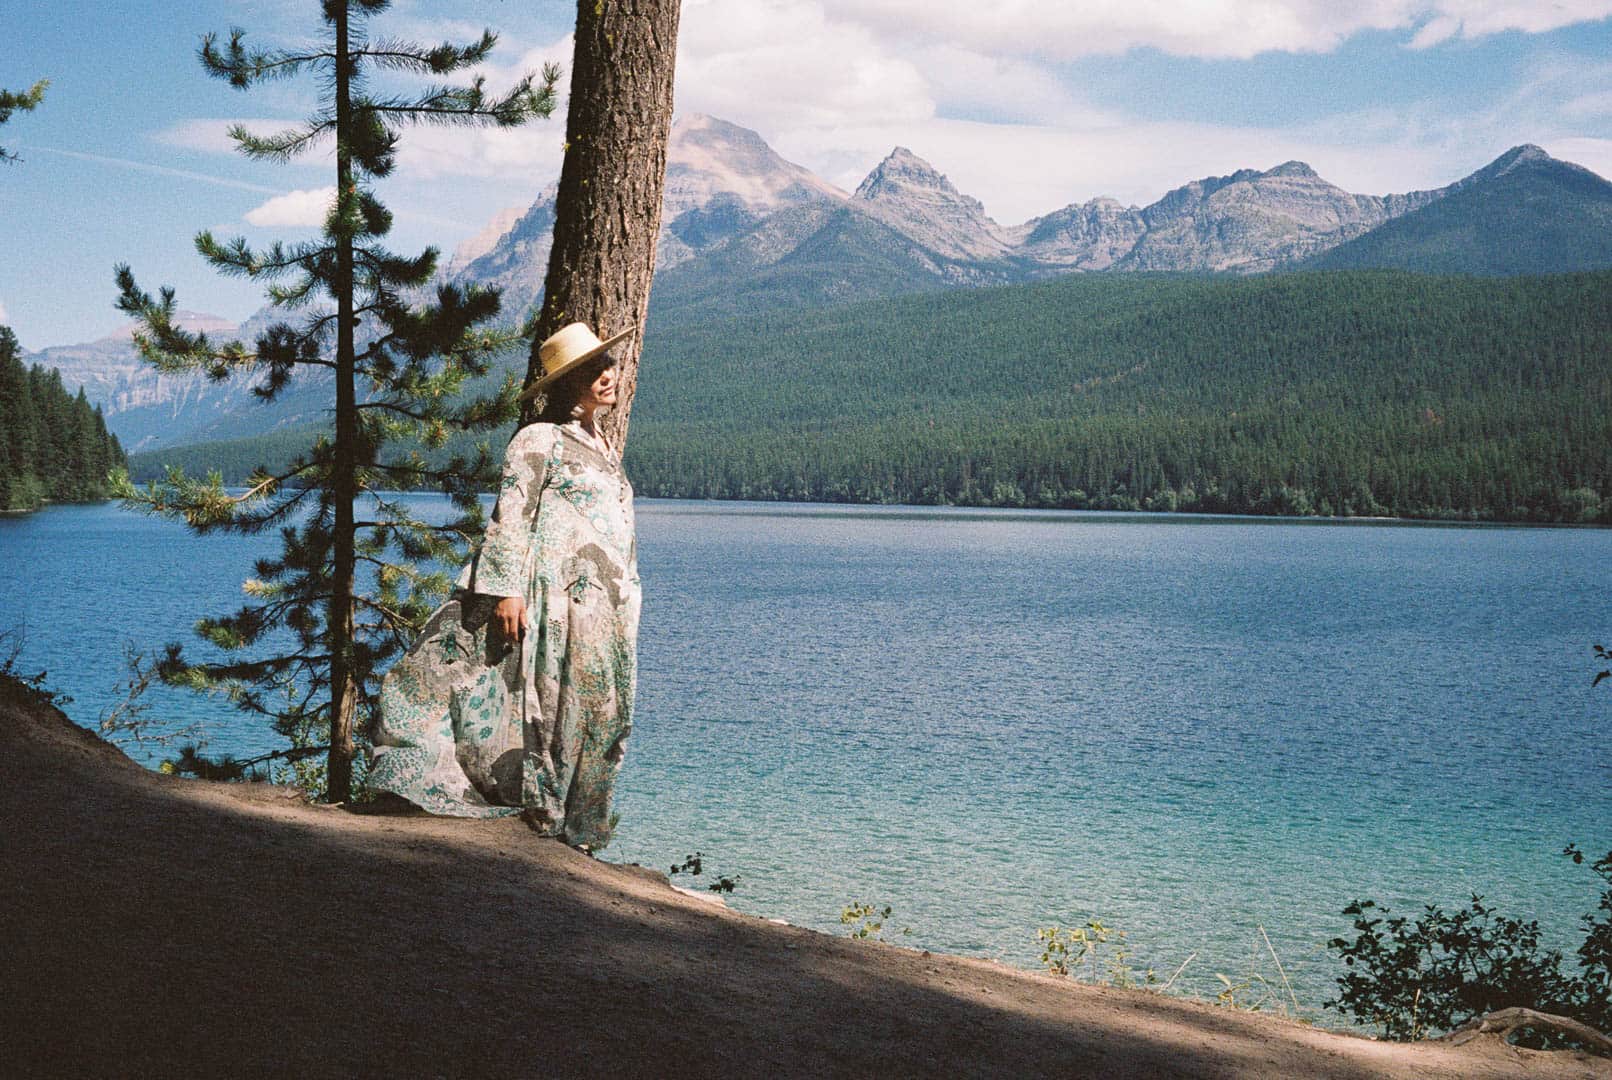 A woman in a kaftan looking across a lake with mountians in the background